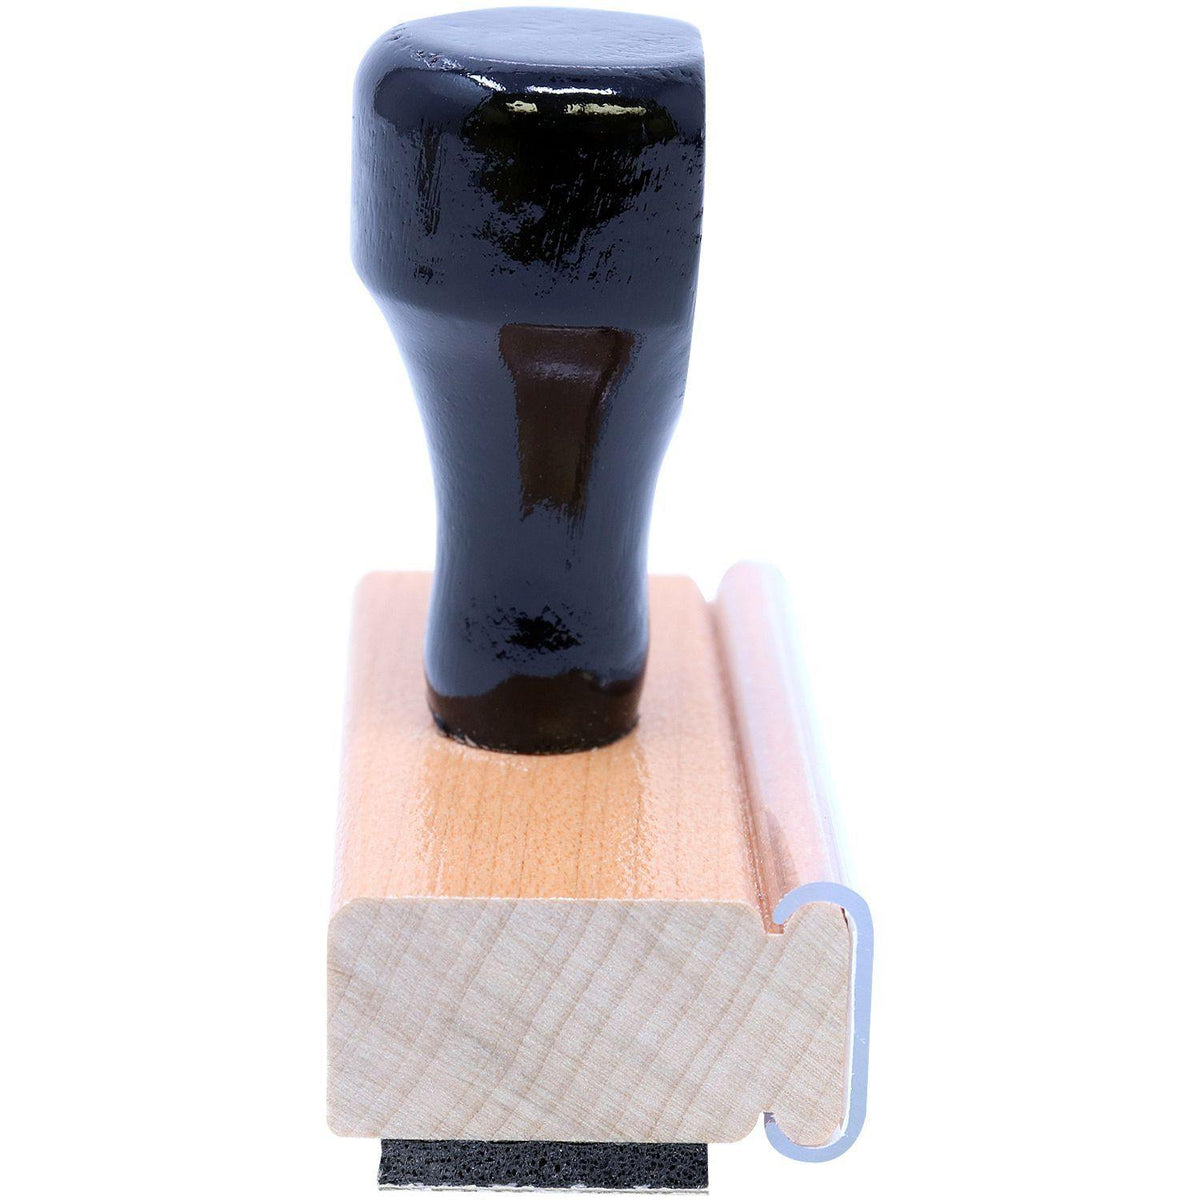 Side View of Large Received Without Contents Rubber Stamp Alt 1